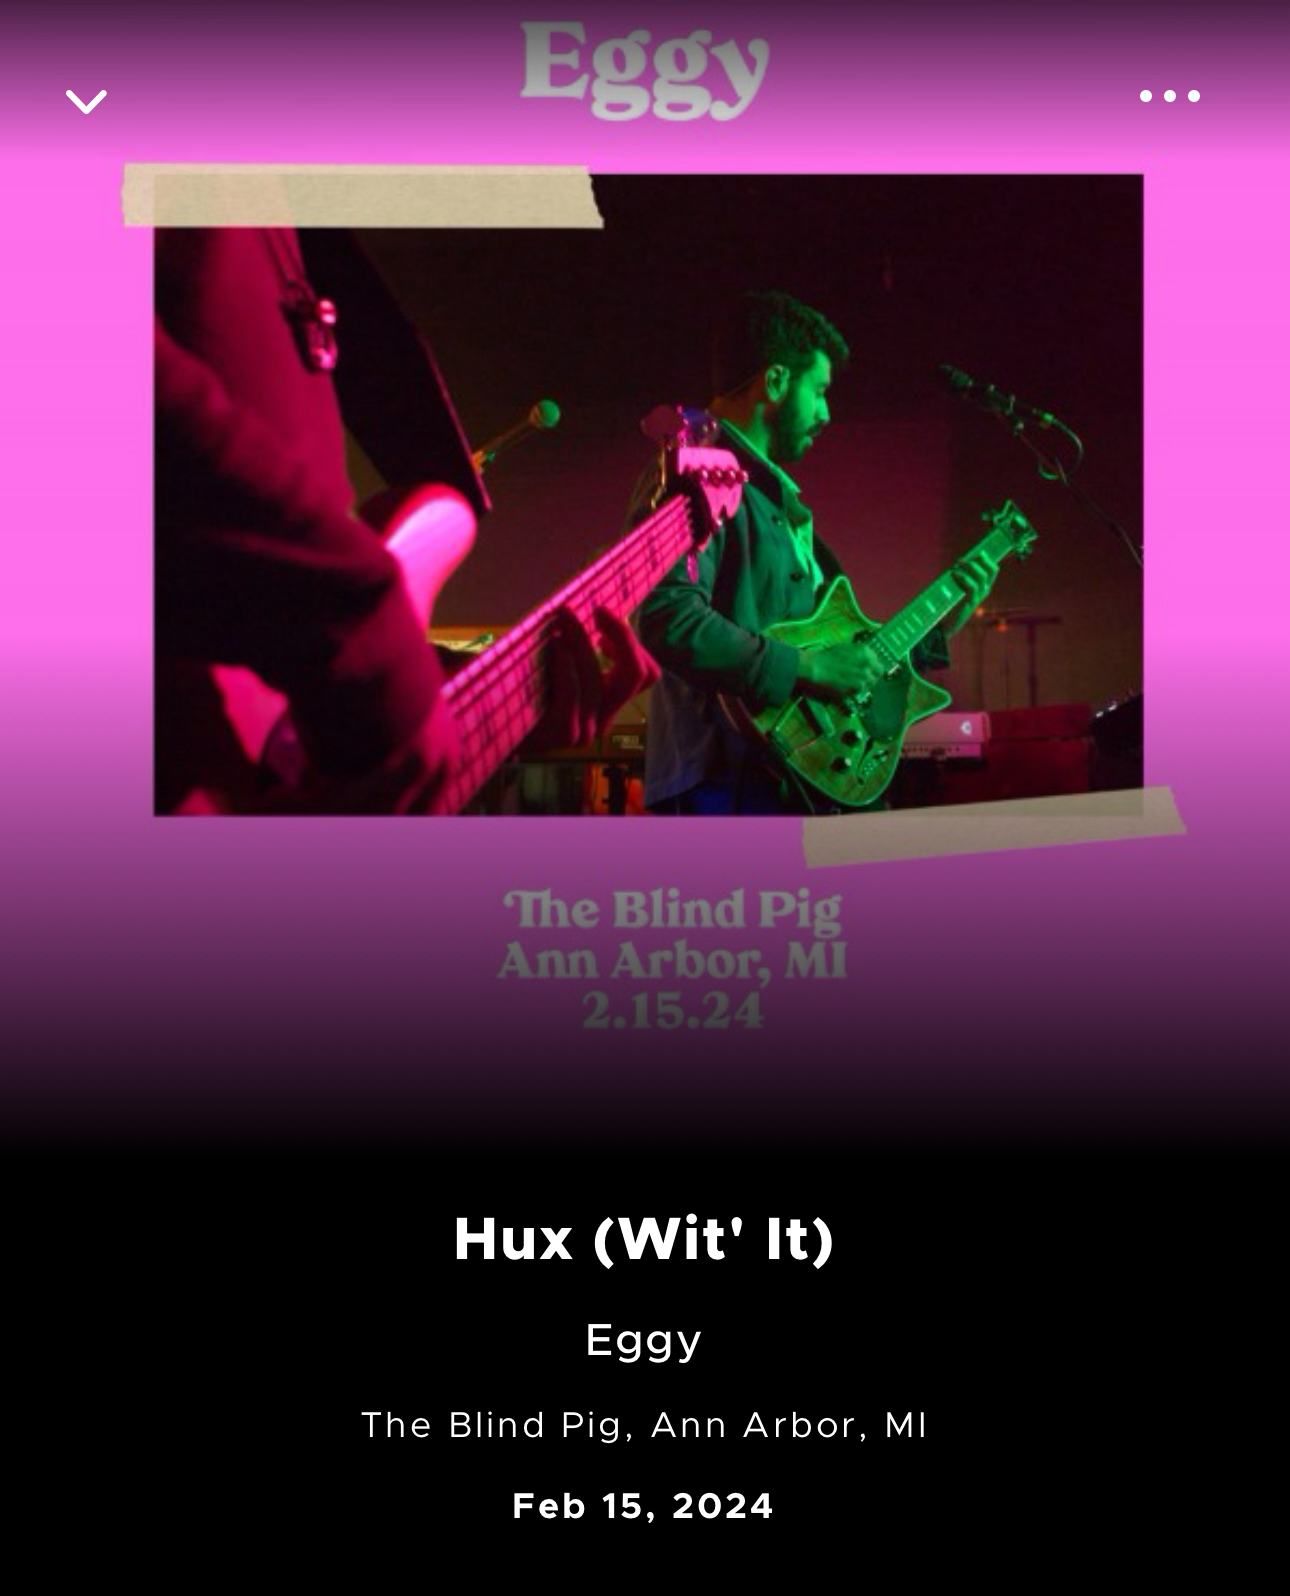 A screenshot of a music player interface displaying the track “Hux (Wit' It)” by Eggy, recorded at The Blind Pig in Ann Arbor, MI, on February 15, 2024. The background of the screenshot shows a